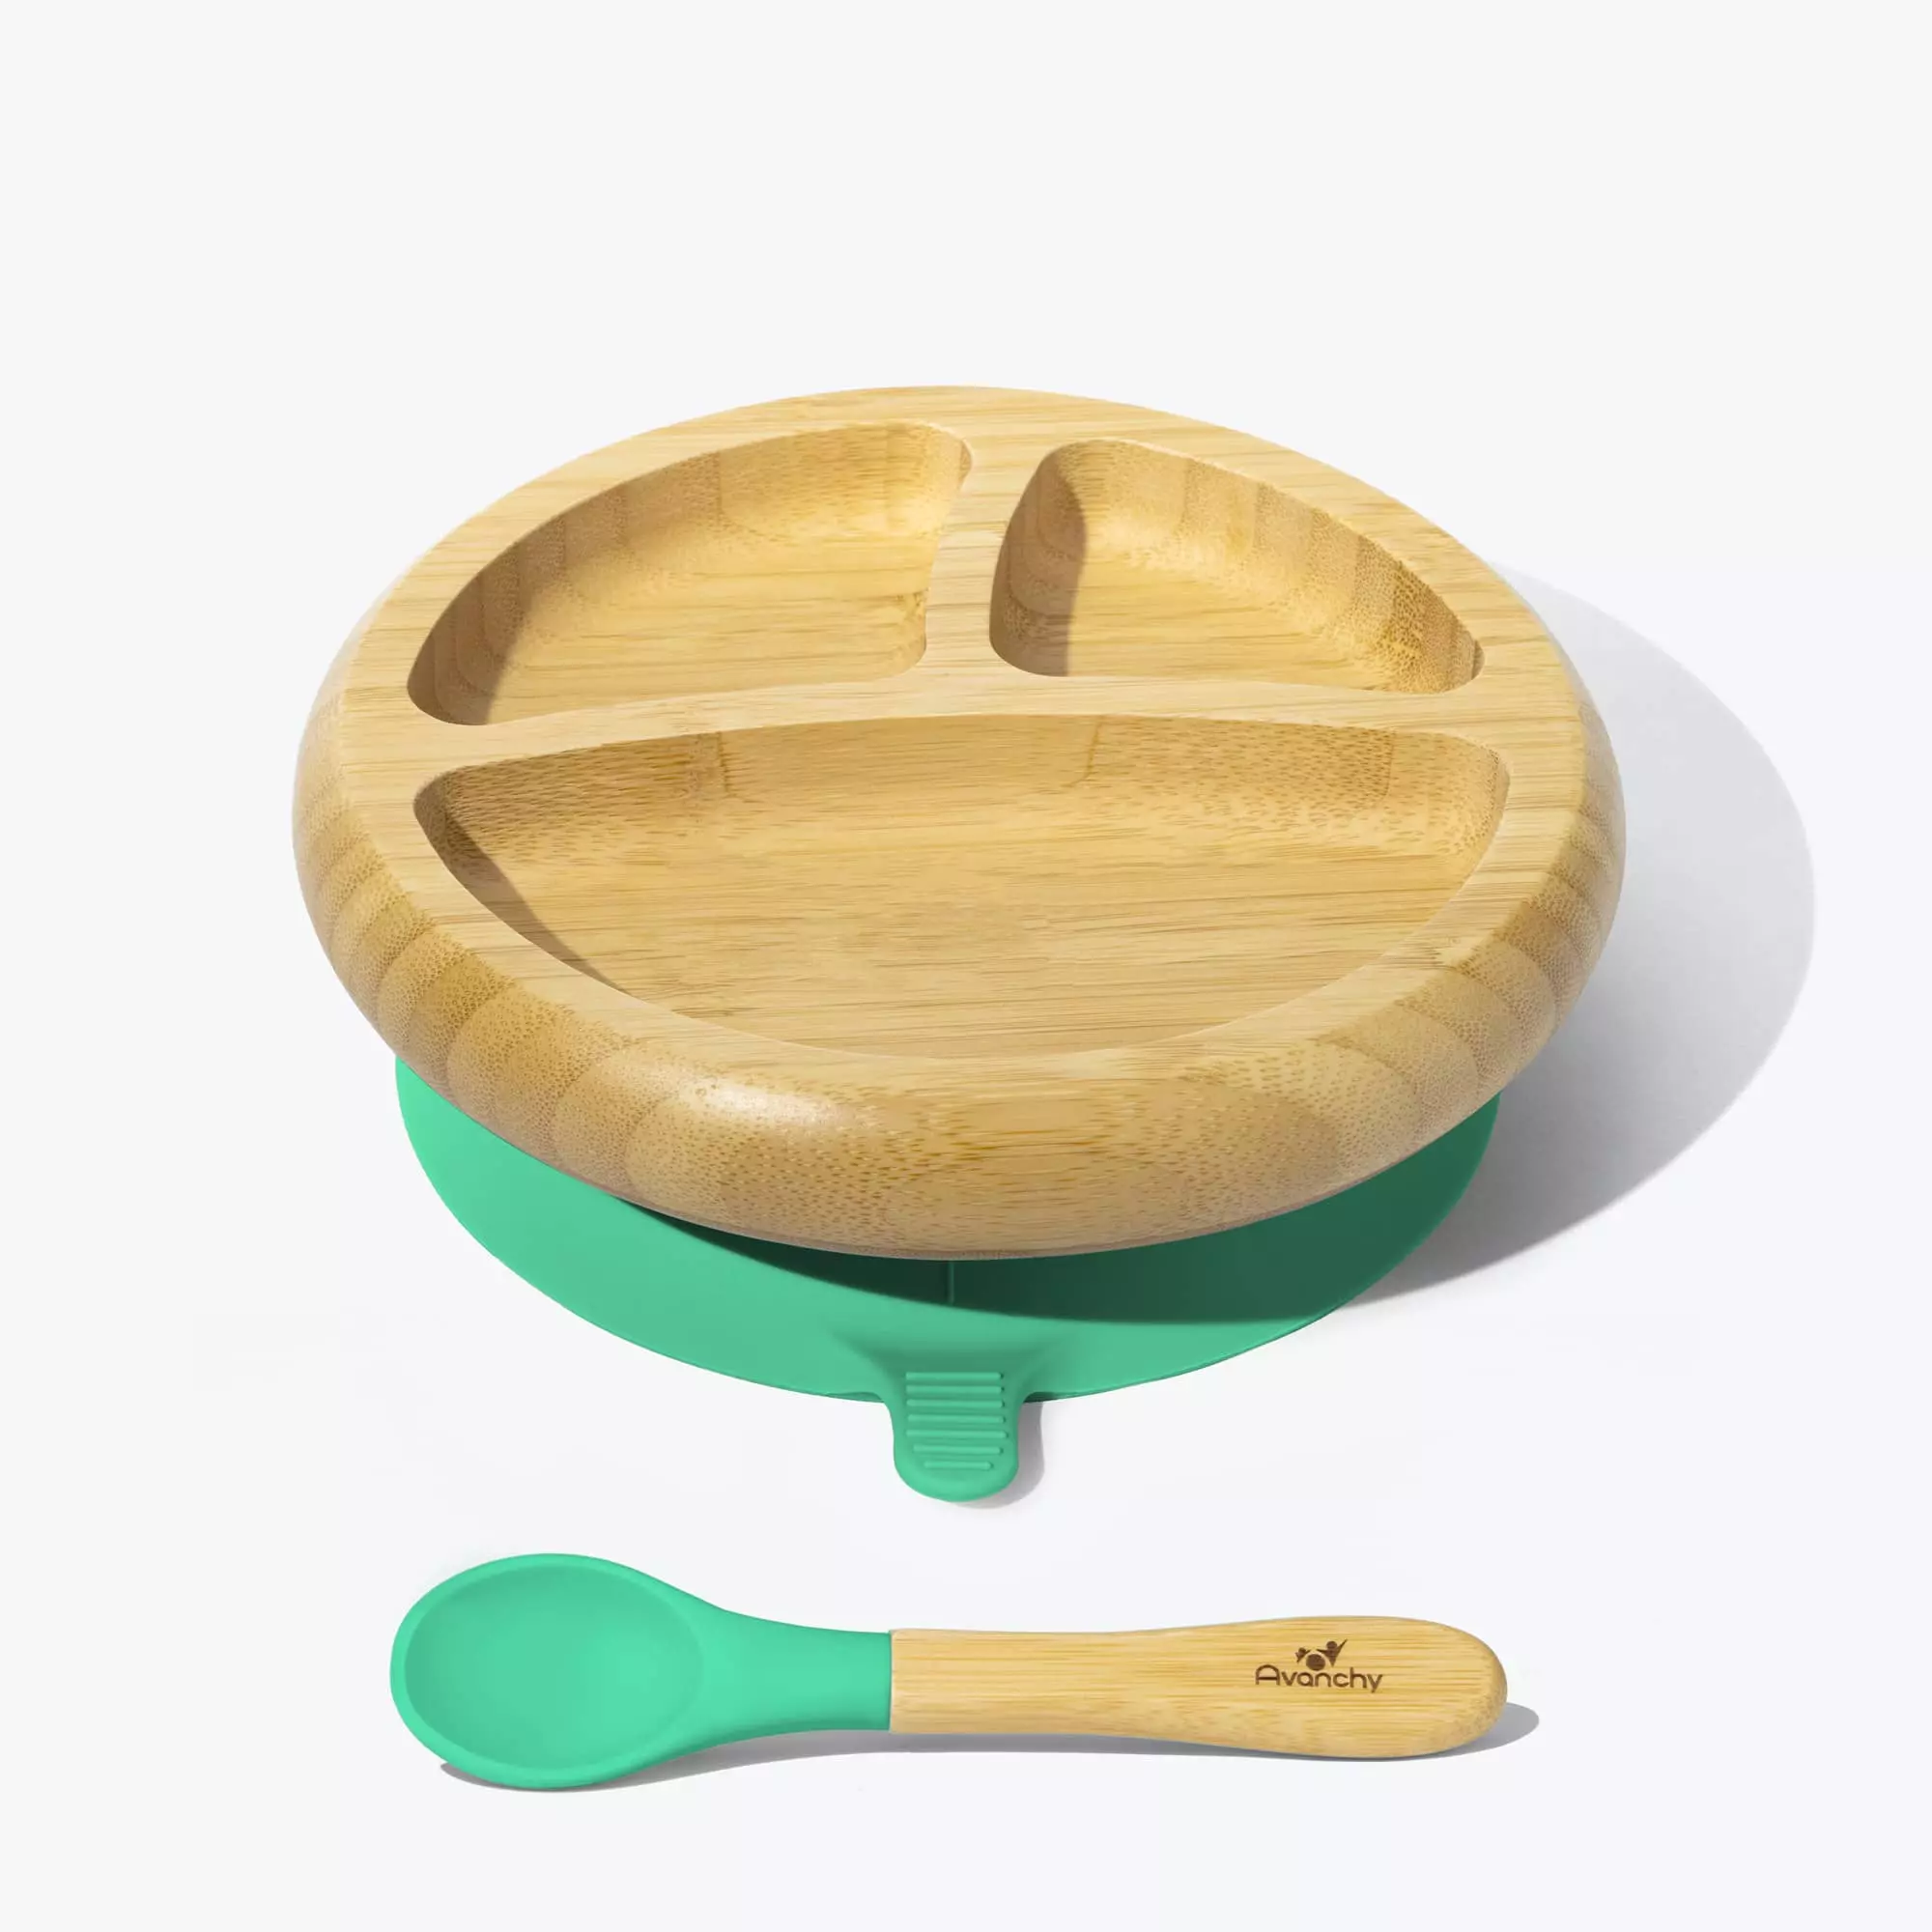 https://www.momjunction.com/wp-content/uploads/product-images/avanchy-bamboo-suction-toddler-plate-and-spoon-set_afl2930.jpg.webp